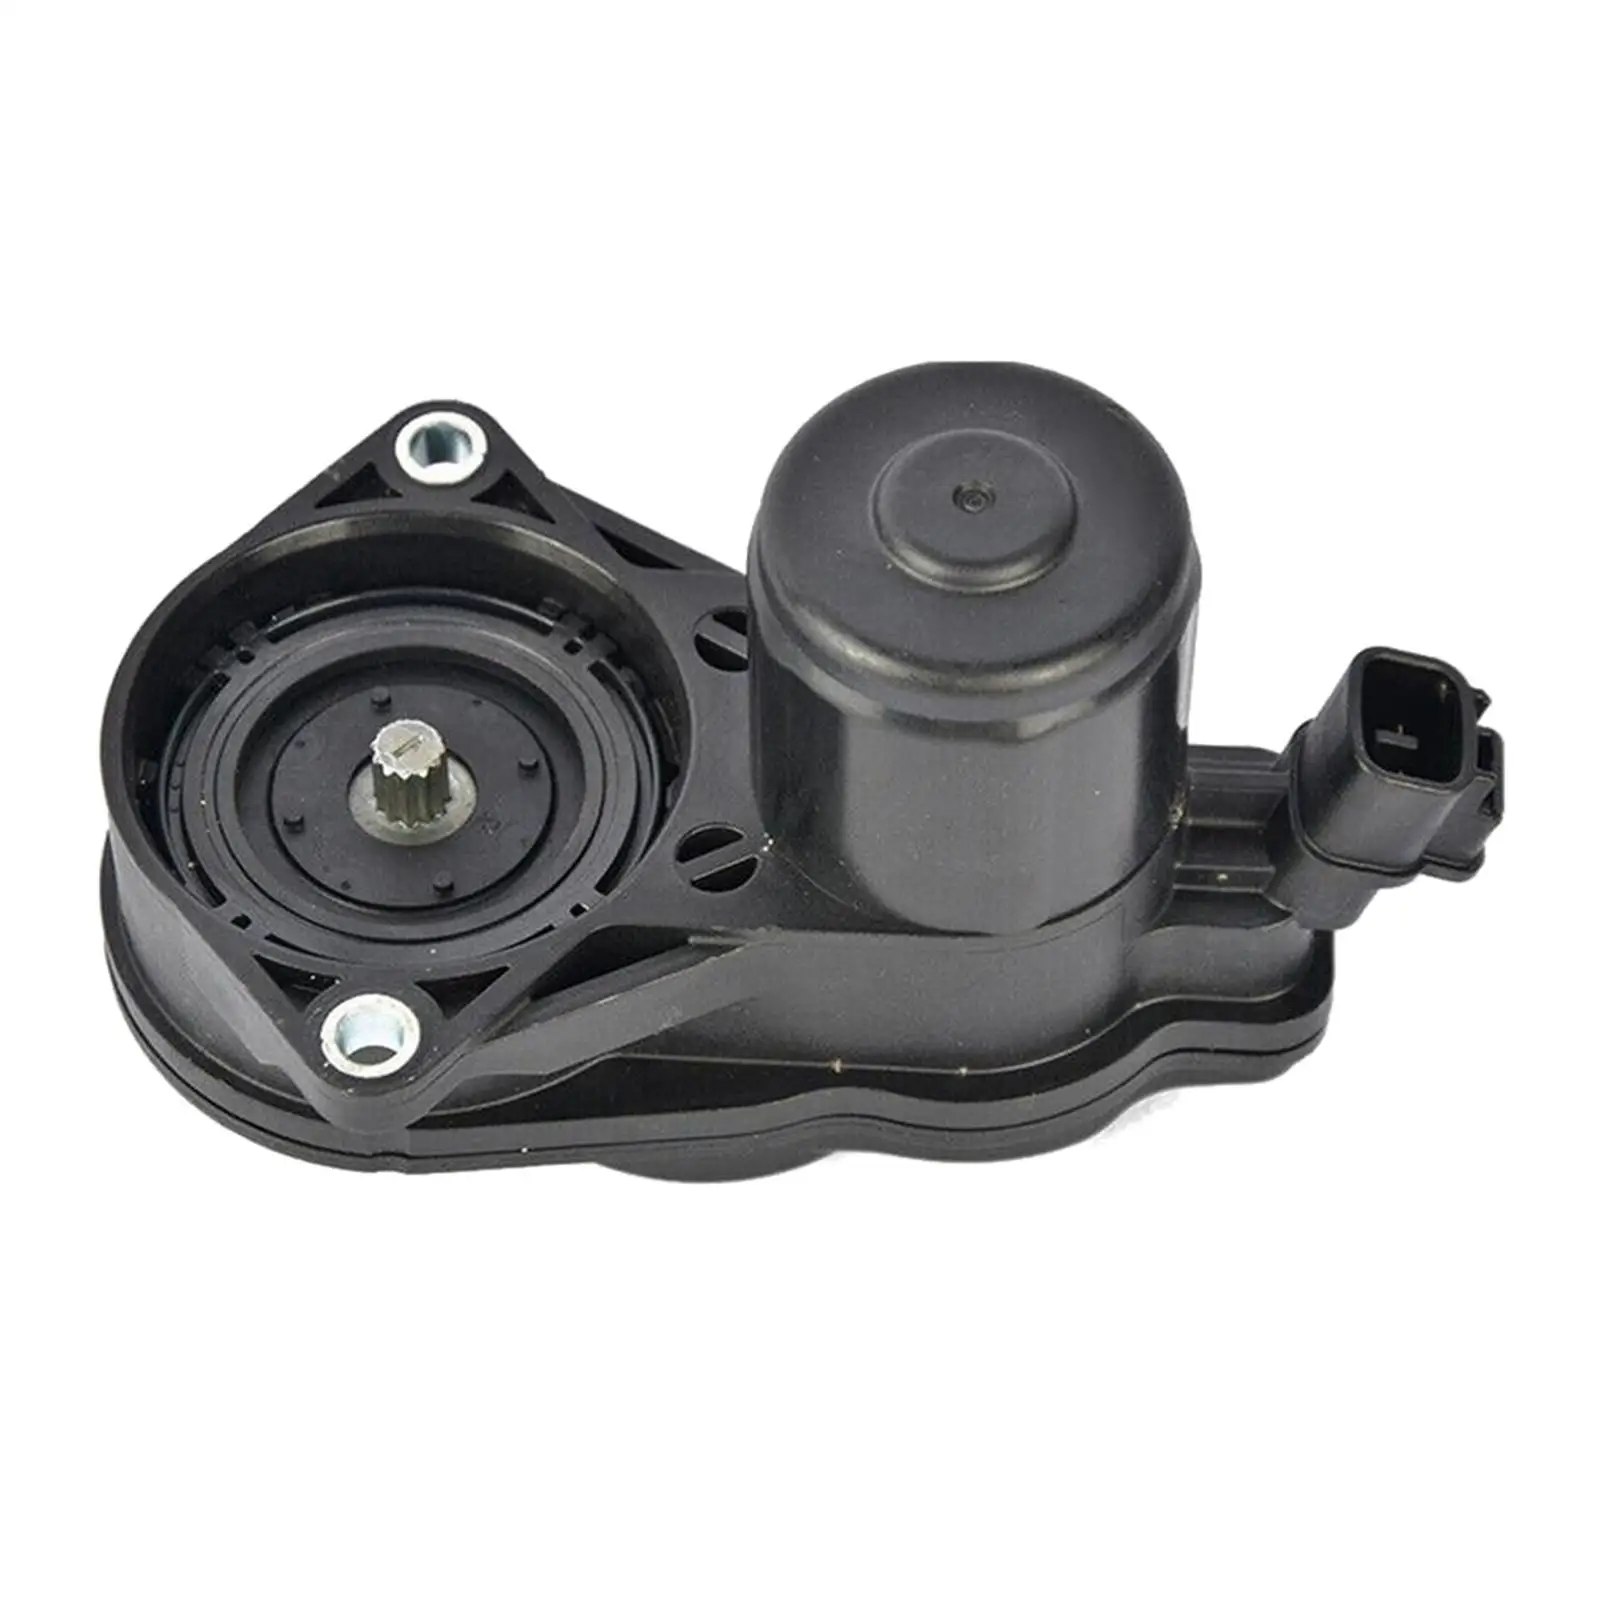 Parking Brake Actuator Assembly Car Accessories for Toyota Venza for camry